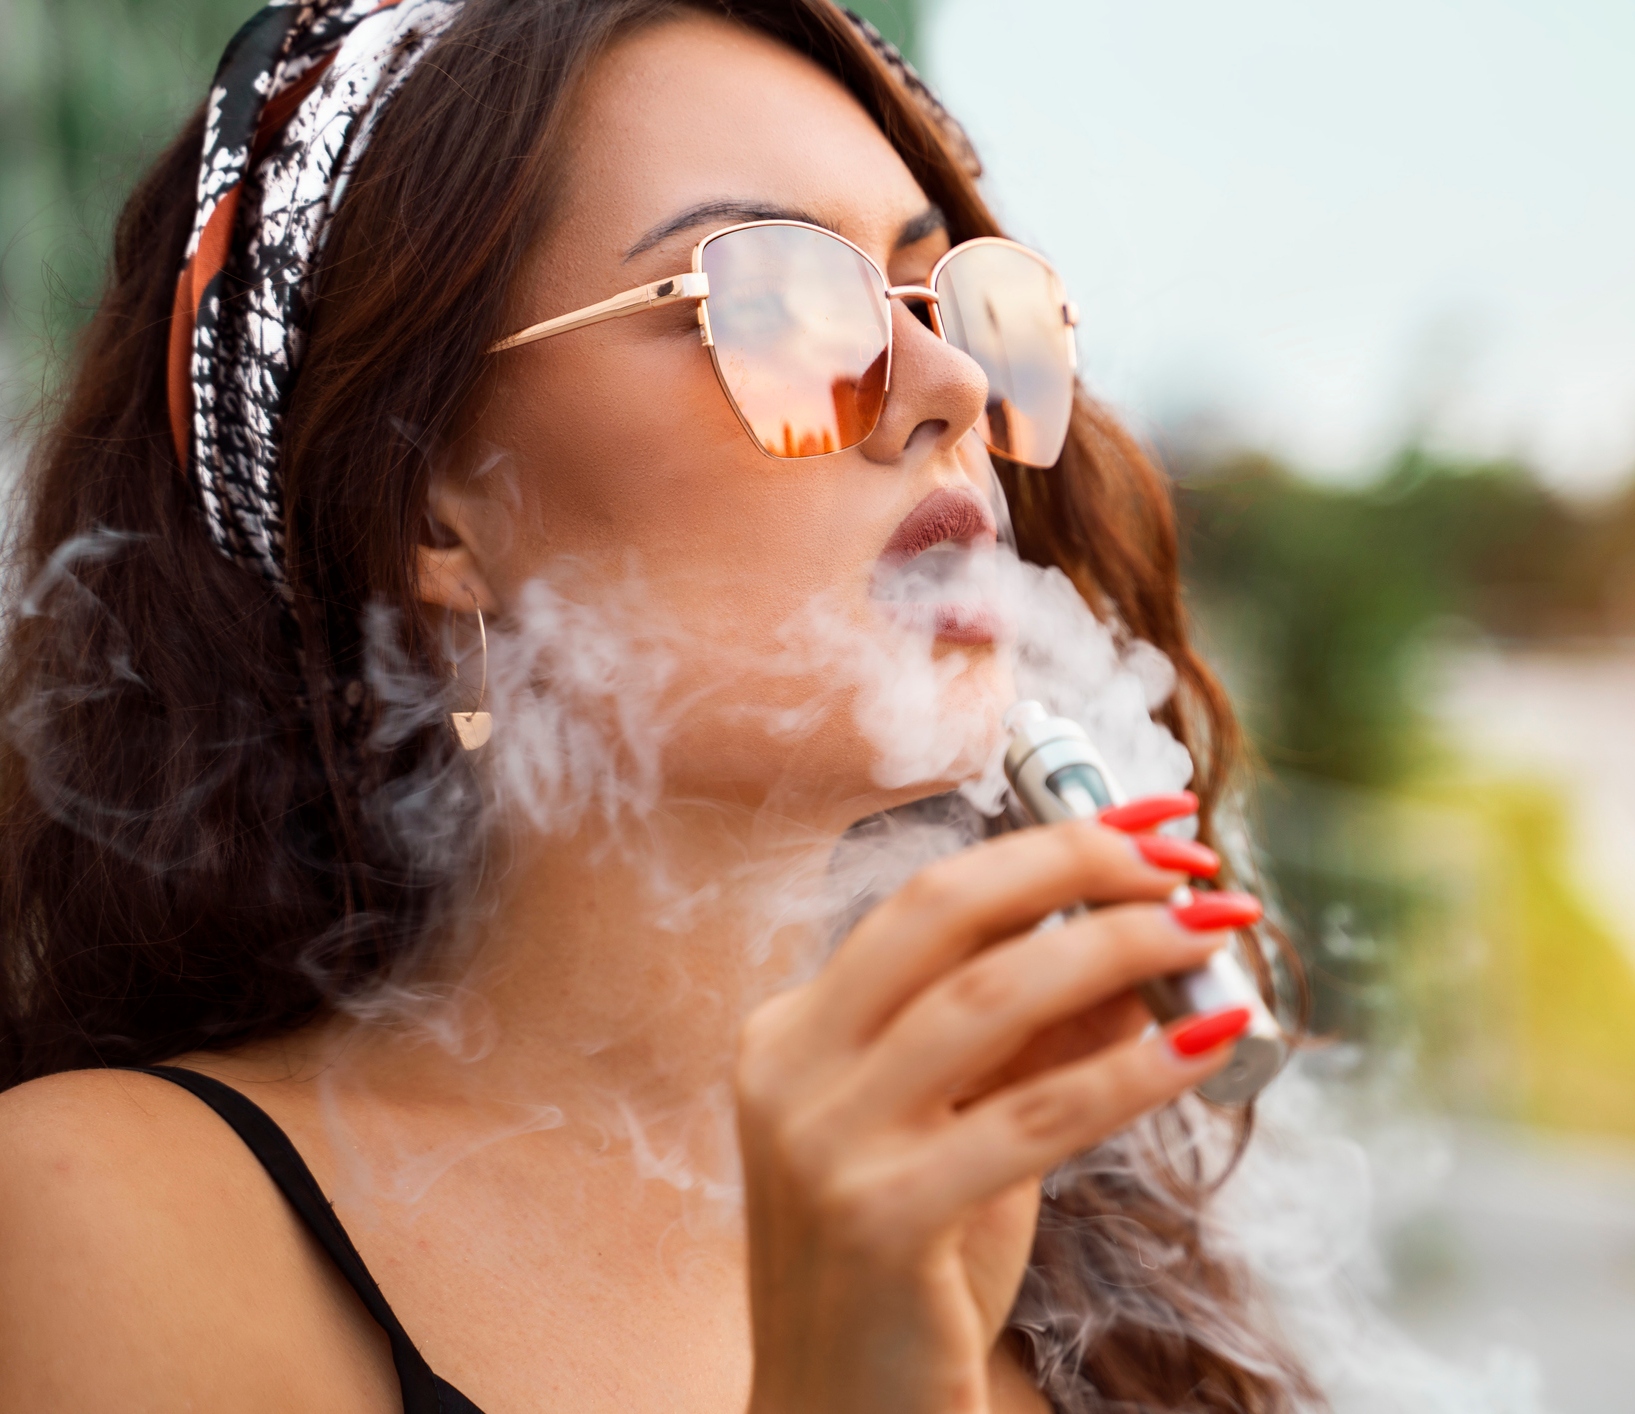 Puff, Puff, Bliss: These Are the Best Vaporizers Currently on the Market